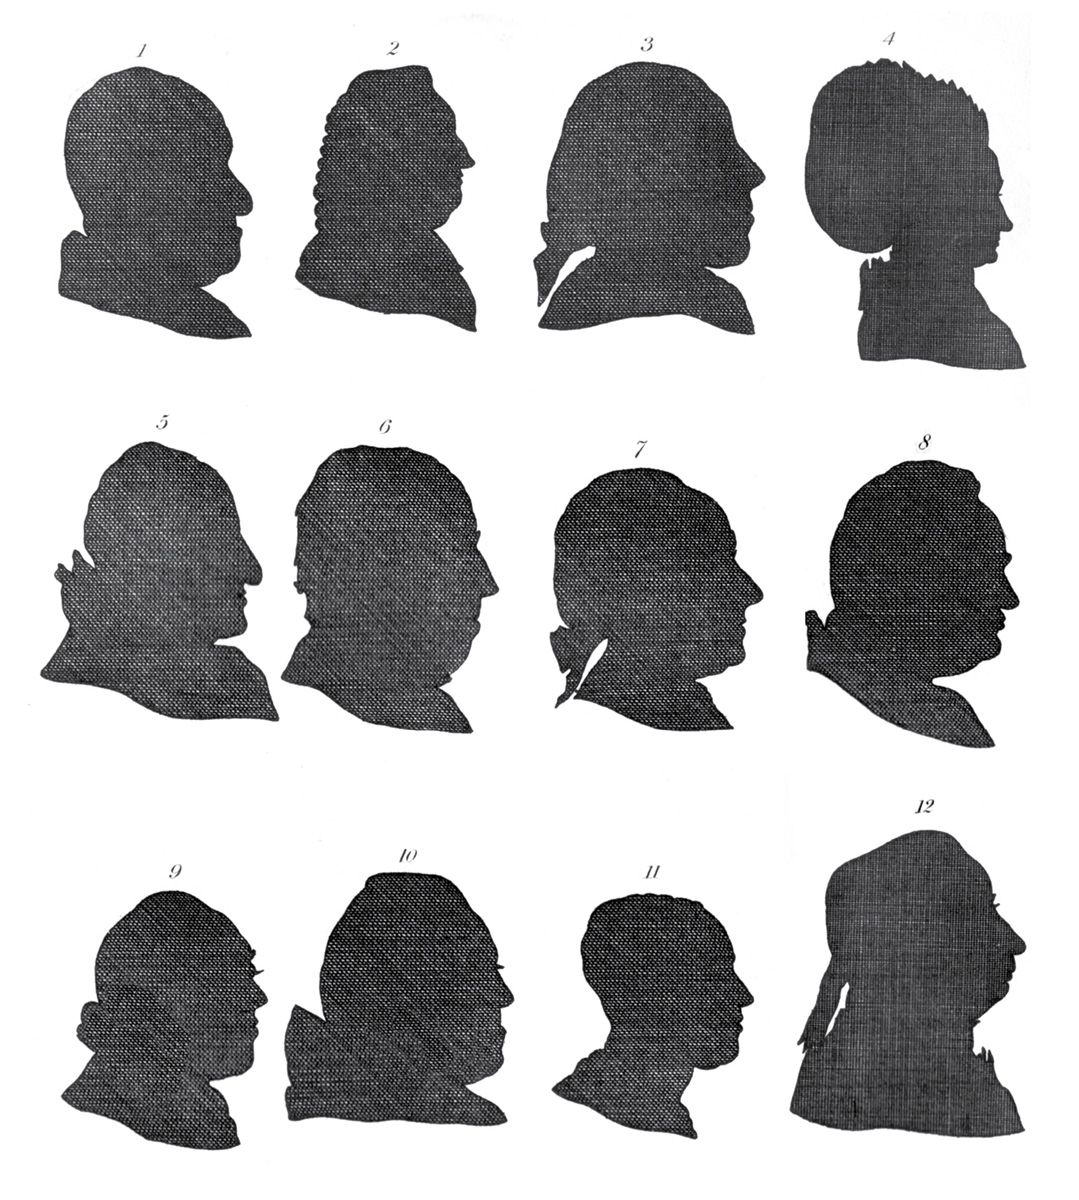 A page of profiles from Johann Kasper Lavater’s 